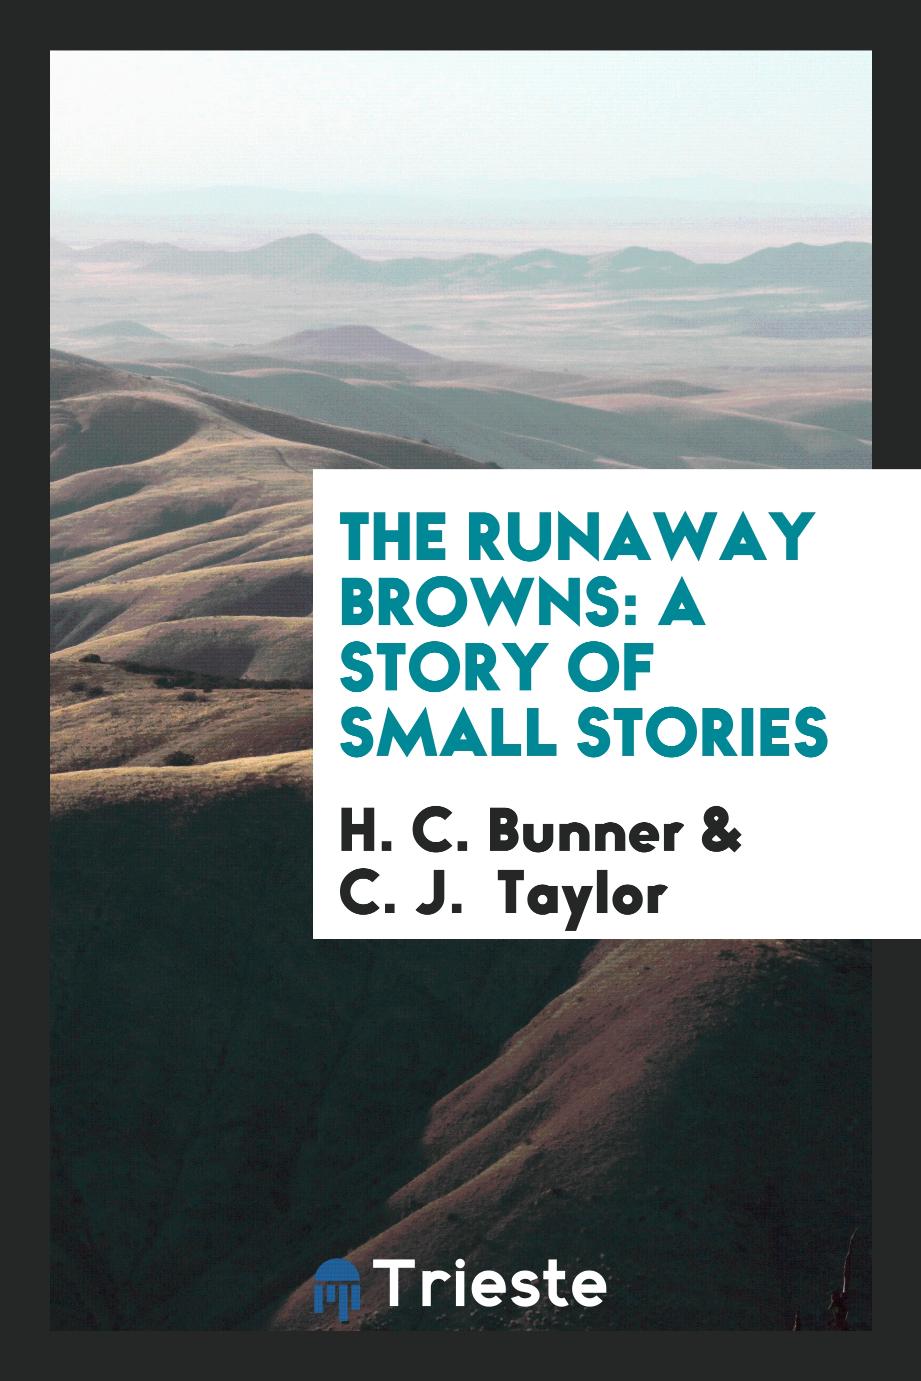 The runaway Browns: a story of small stories